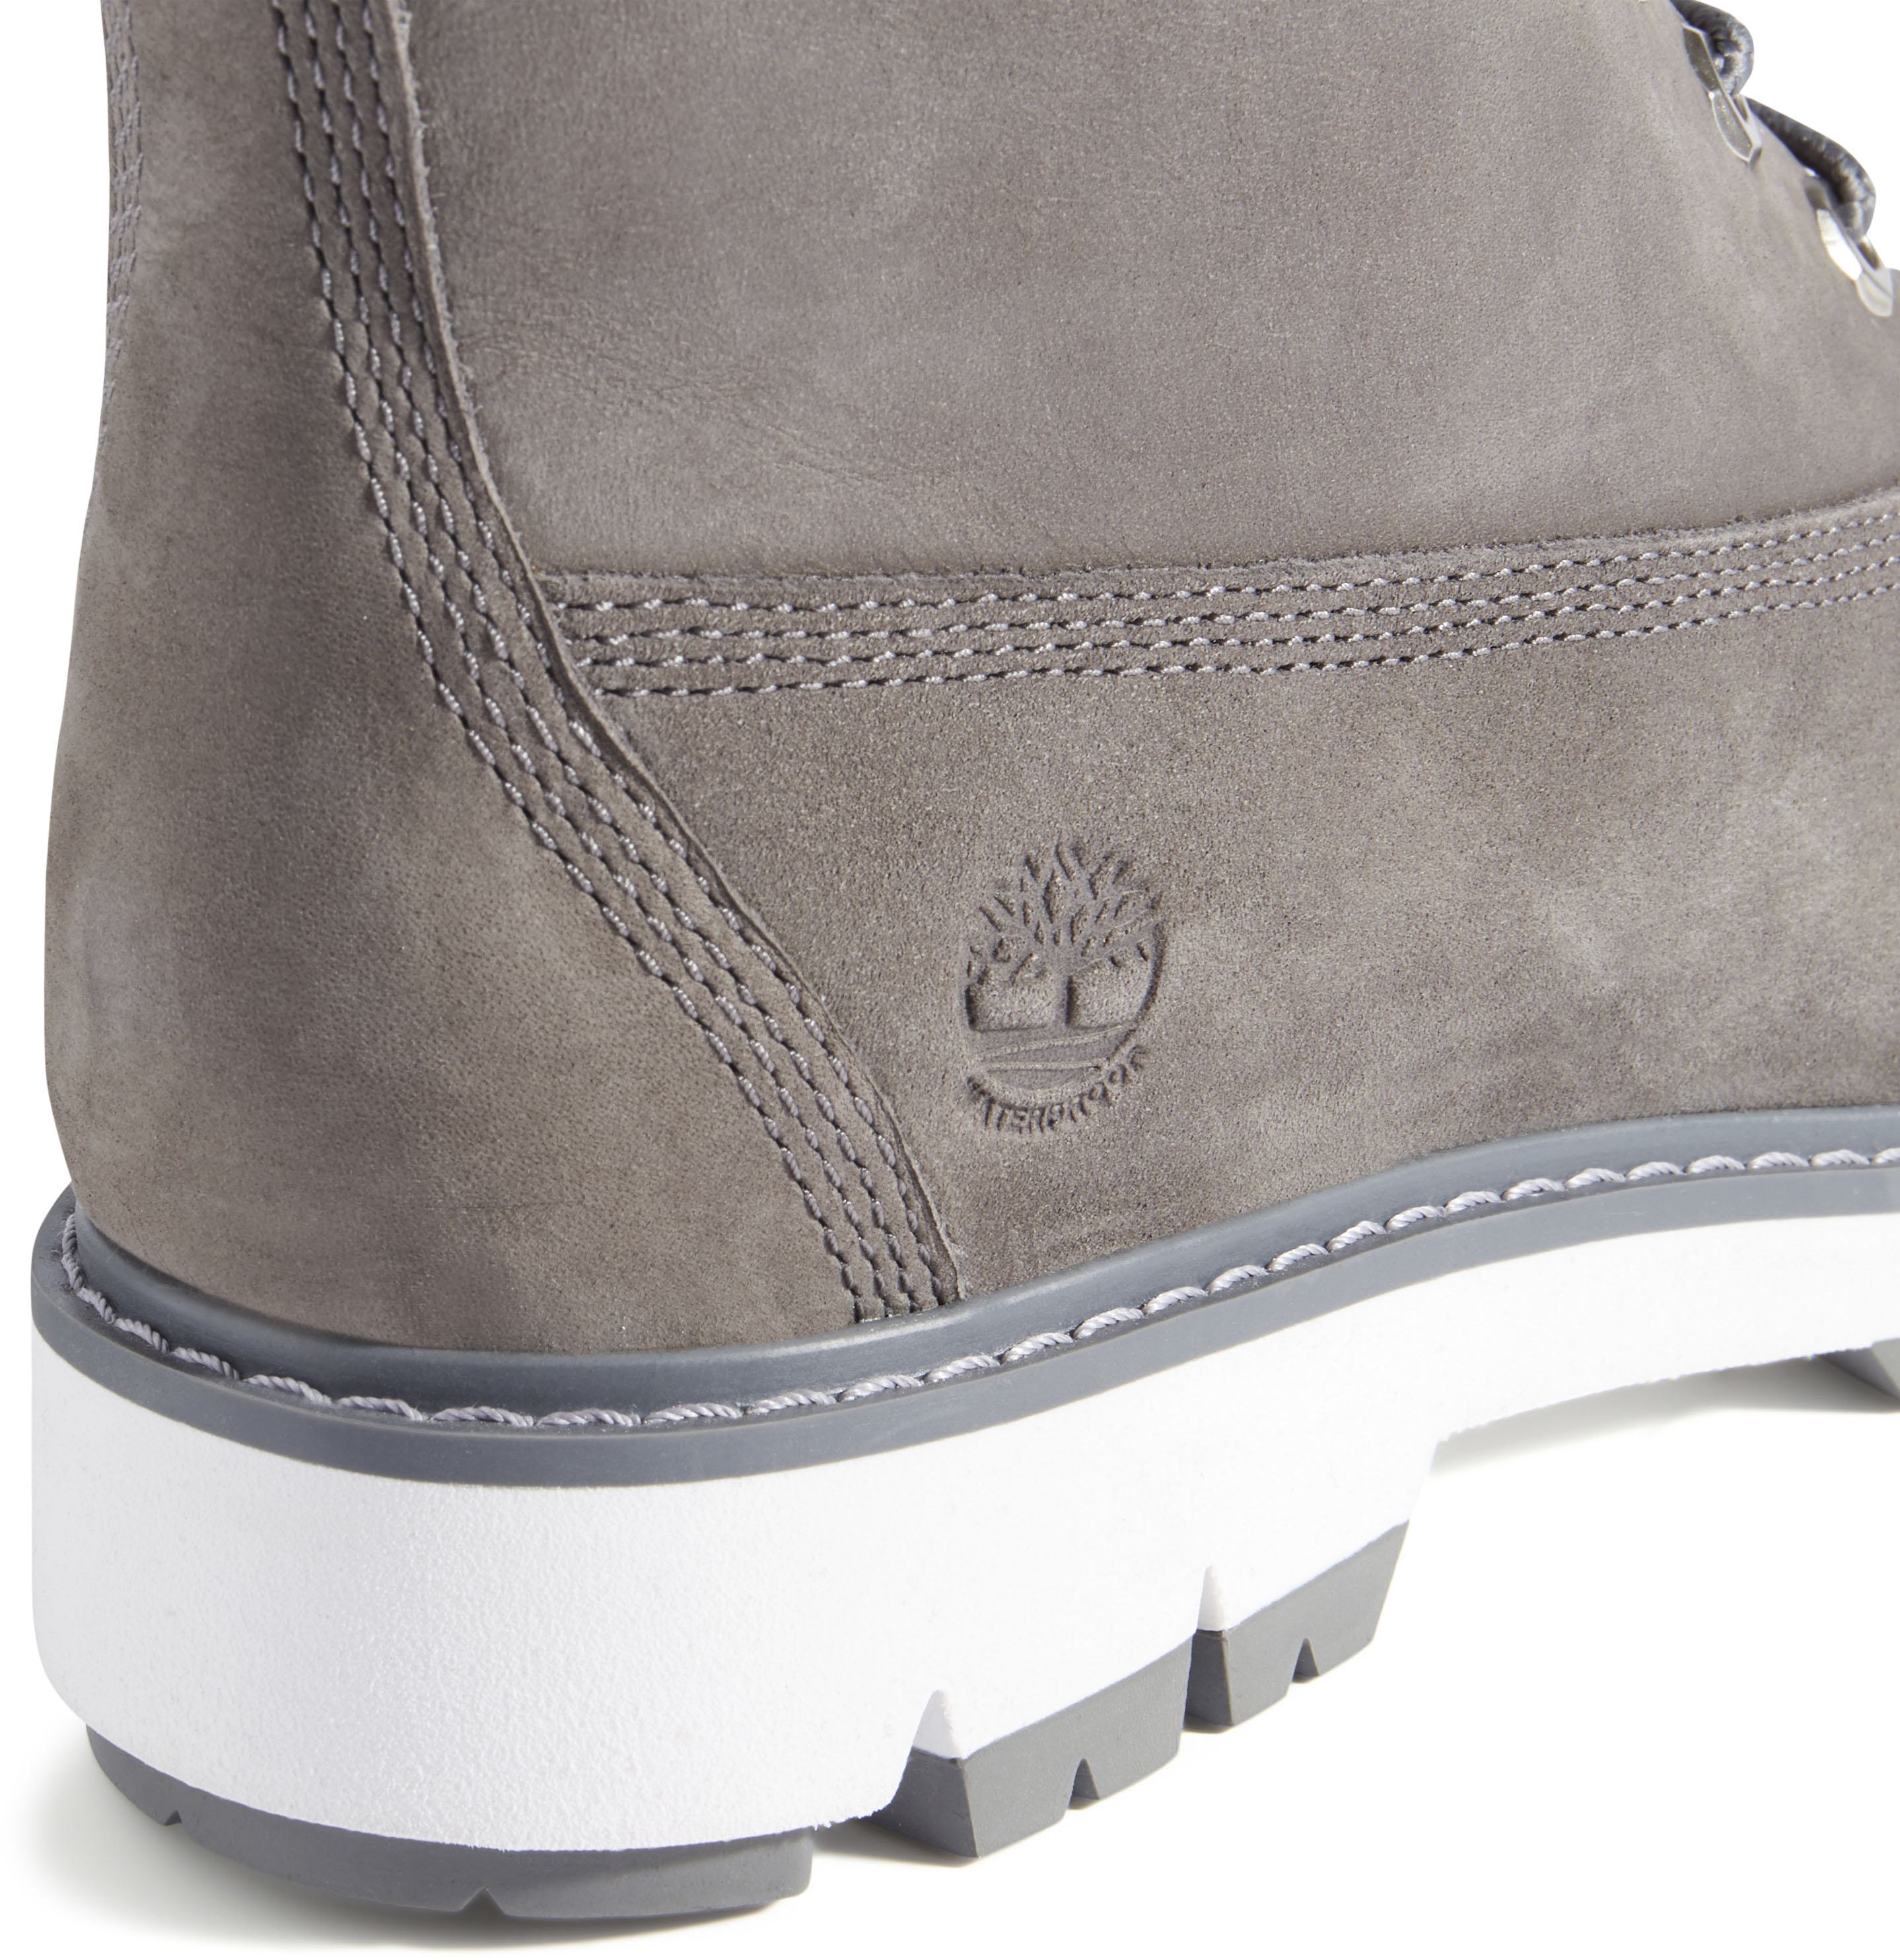 TIMBERLAND Snowboots Lucia in Taupe, Grau 